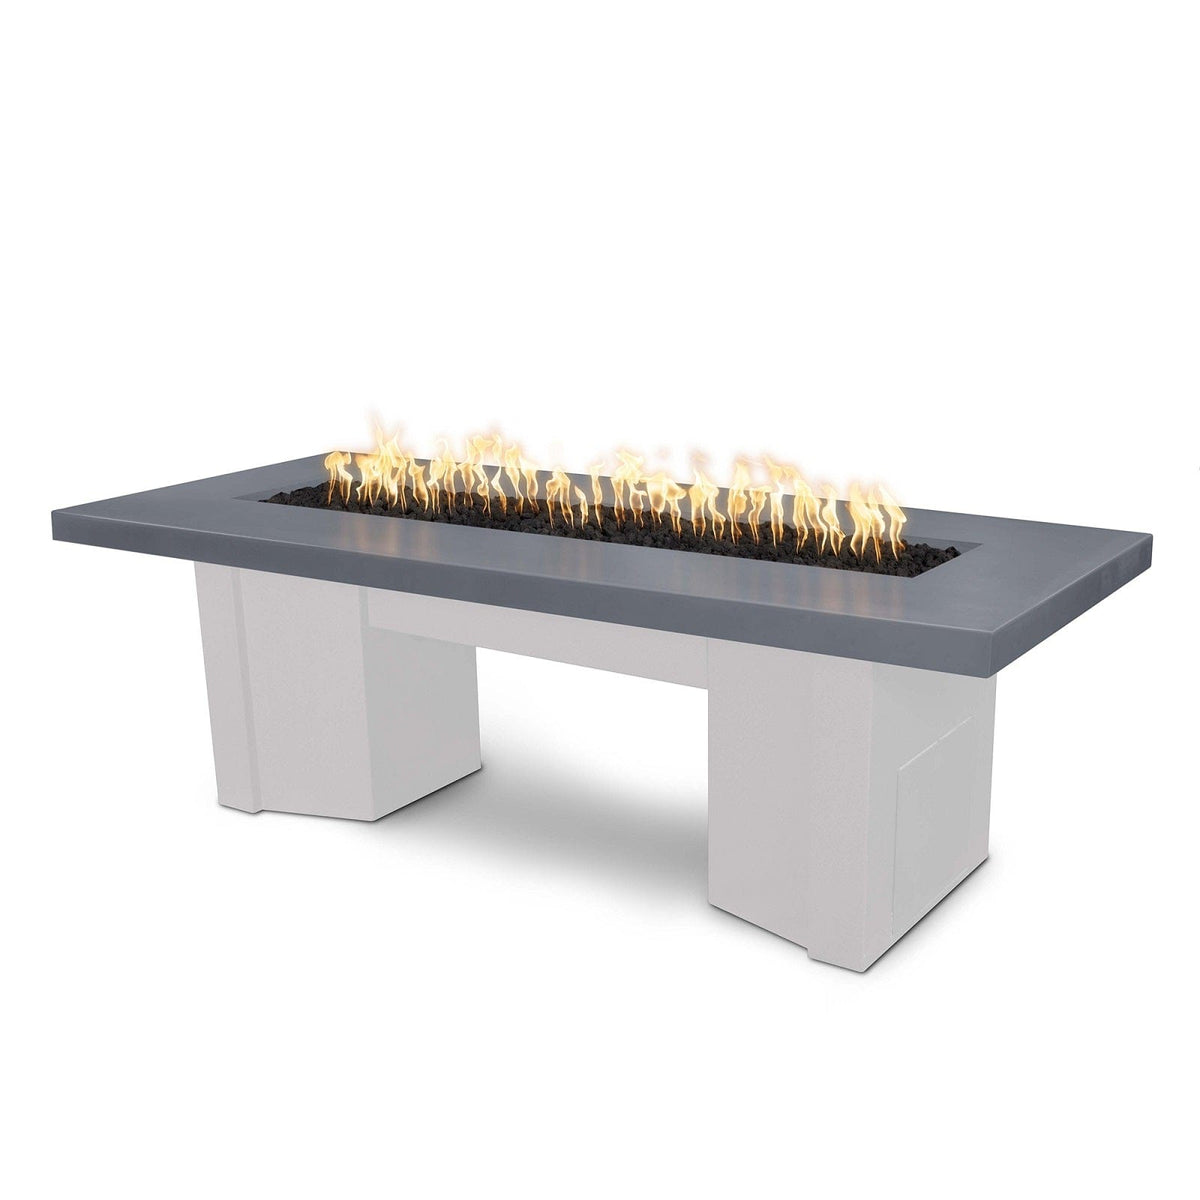 The Outdoor Plus Fire Features Gray (-GRY) / White Powder Coated Steel (-WHT) The Outdoor Plus 60&quot; Alameda Fire Table Smooth Concrete in Natural Gas - Flame Sense System with Push Button Spark Igniter / OPT-ALMGFRC60FSEN-NG